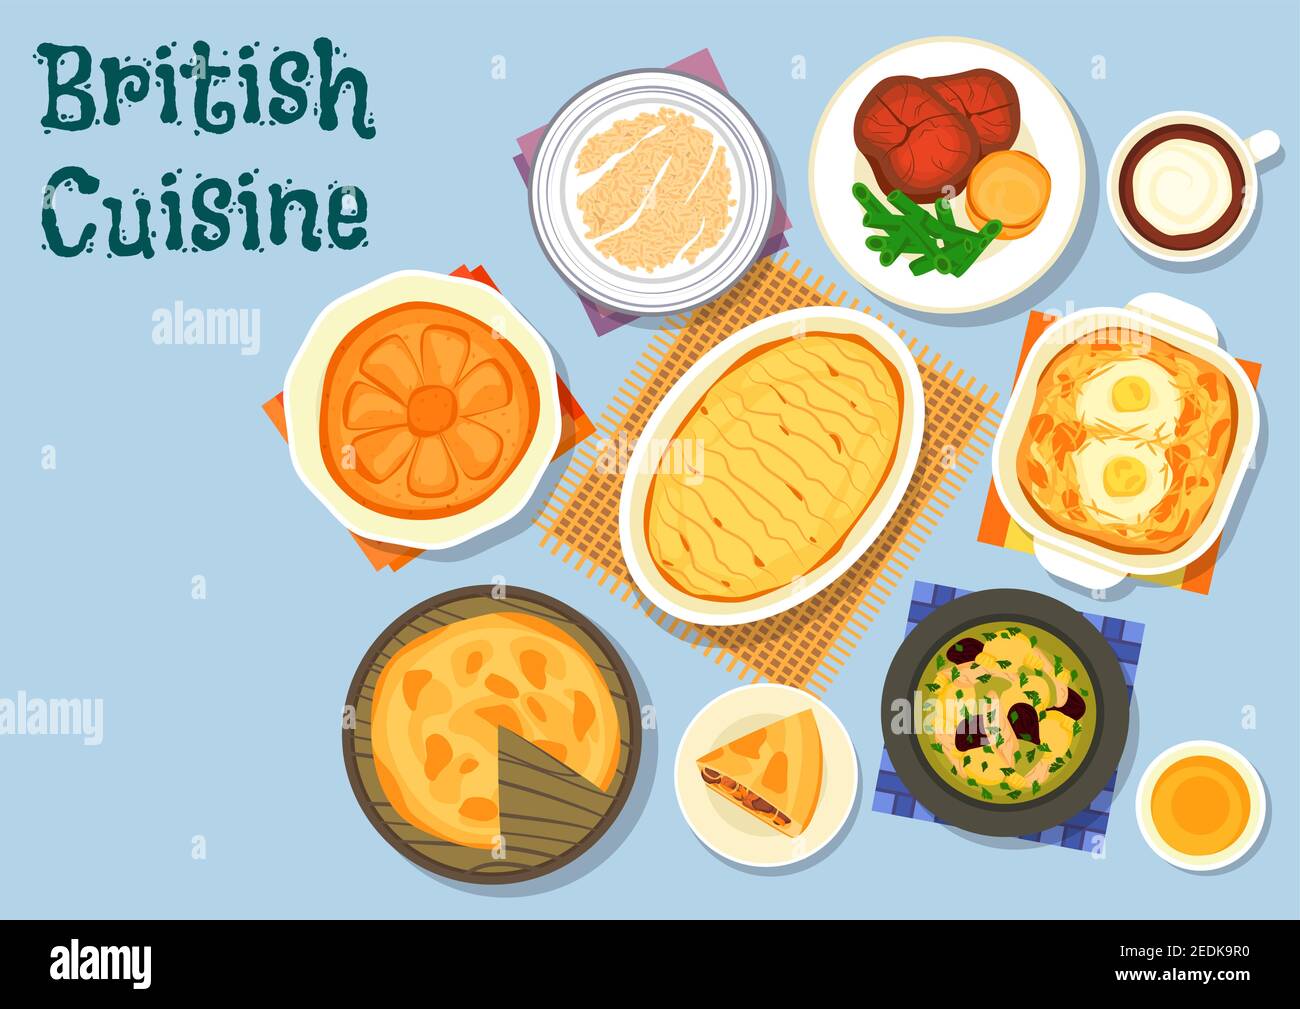 British cuisine lunch menu icon with lamb vegetable soup, roast beef with yorkshire pudding, beef kidney pie, potato cabbage casserole with eggs, milk Stock Vector